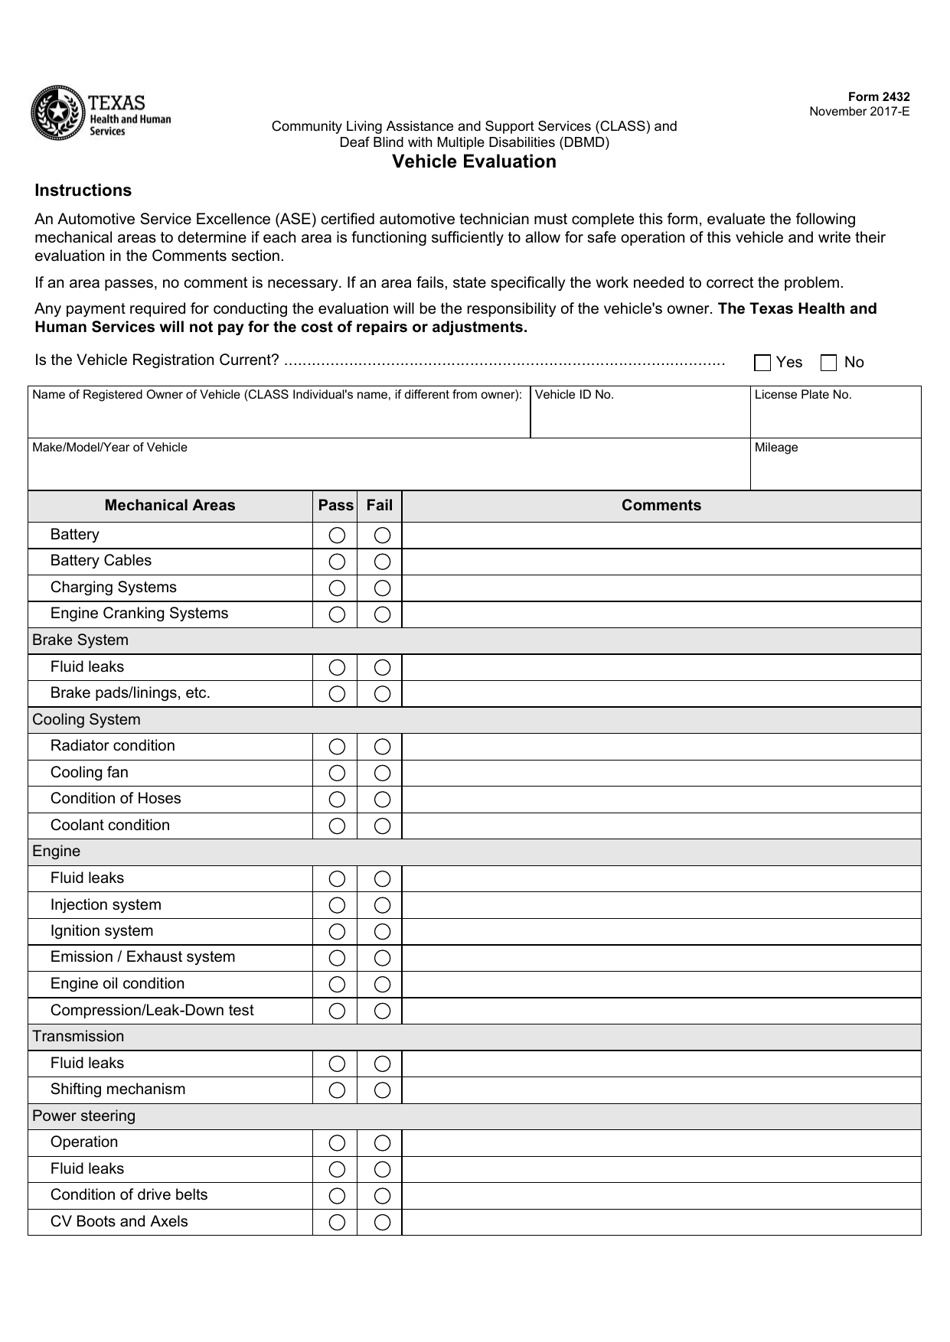 Form 2432 Community Living Assistance and Support Services (Class) and Deaf Blind With Multiple Disabilities (Dbmd) Vehicle Evaluation - Texas, Page 1